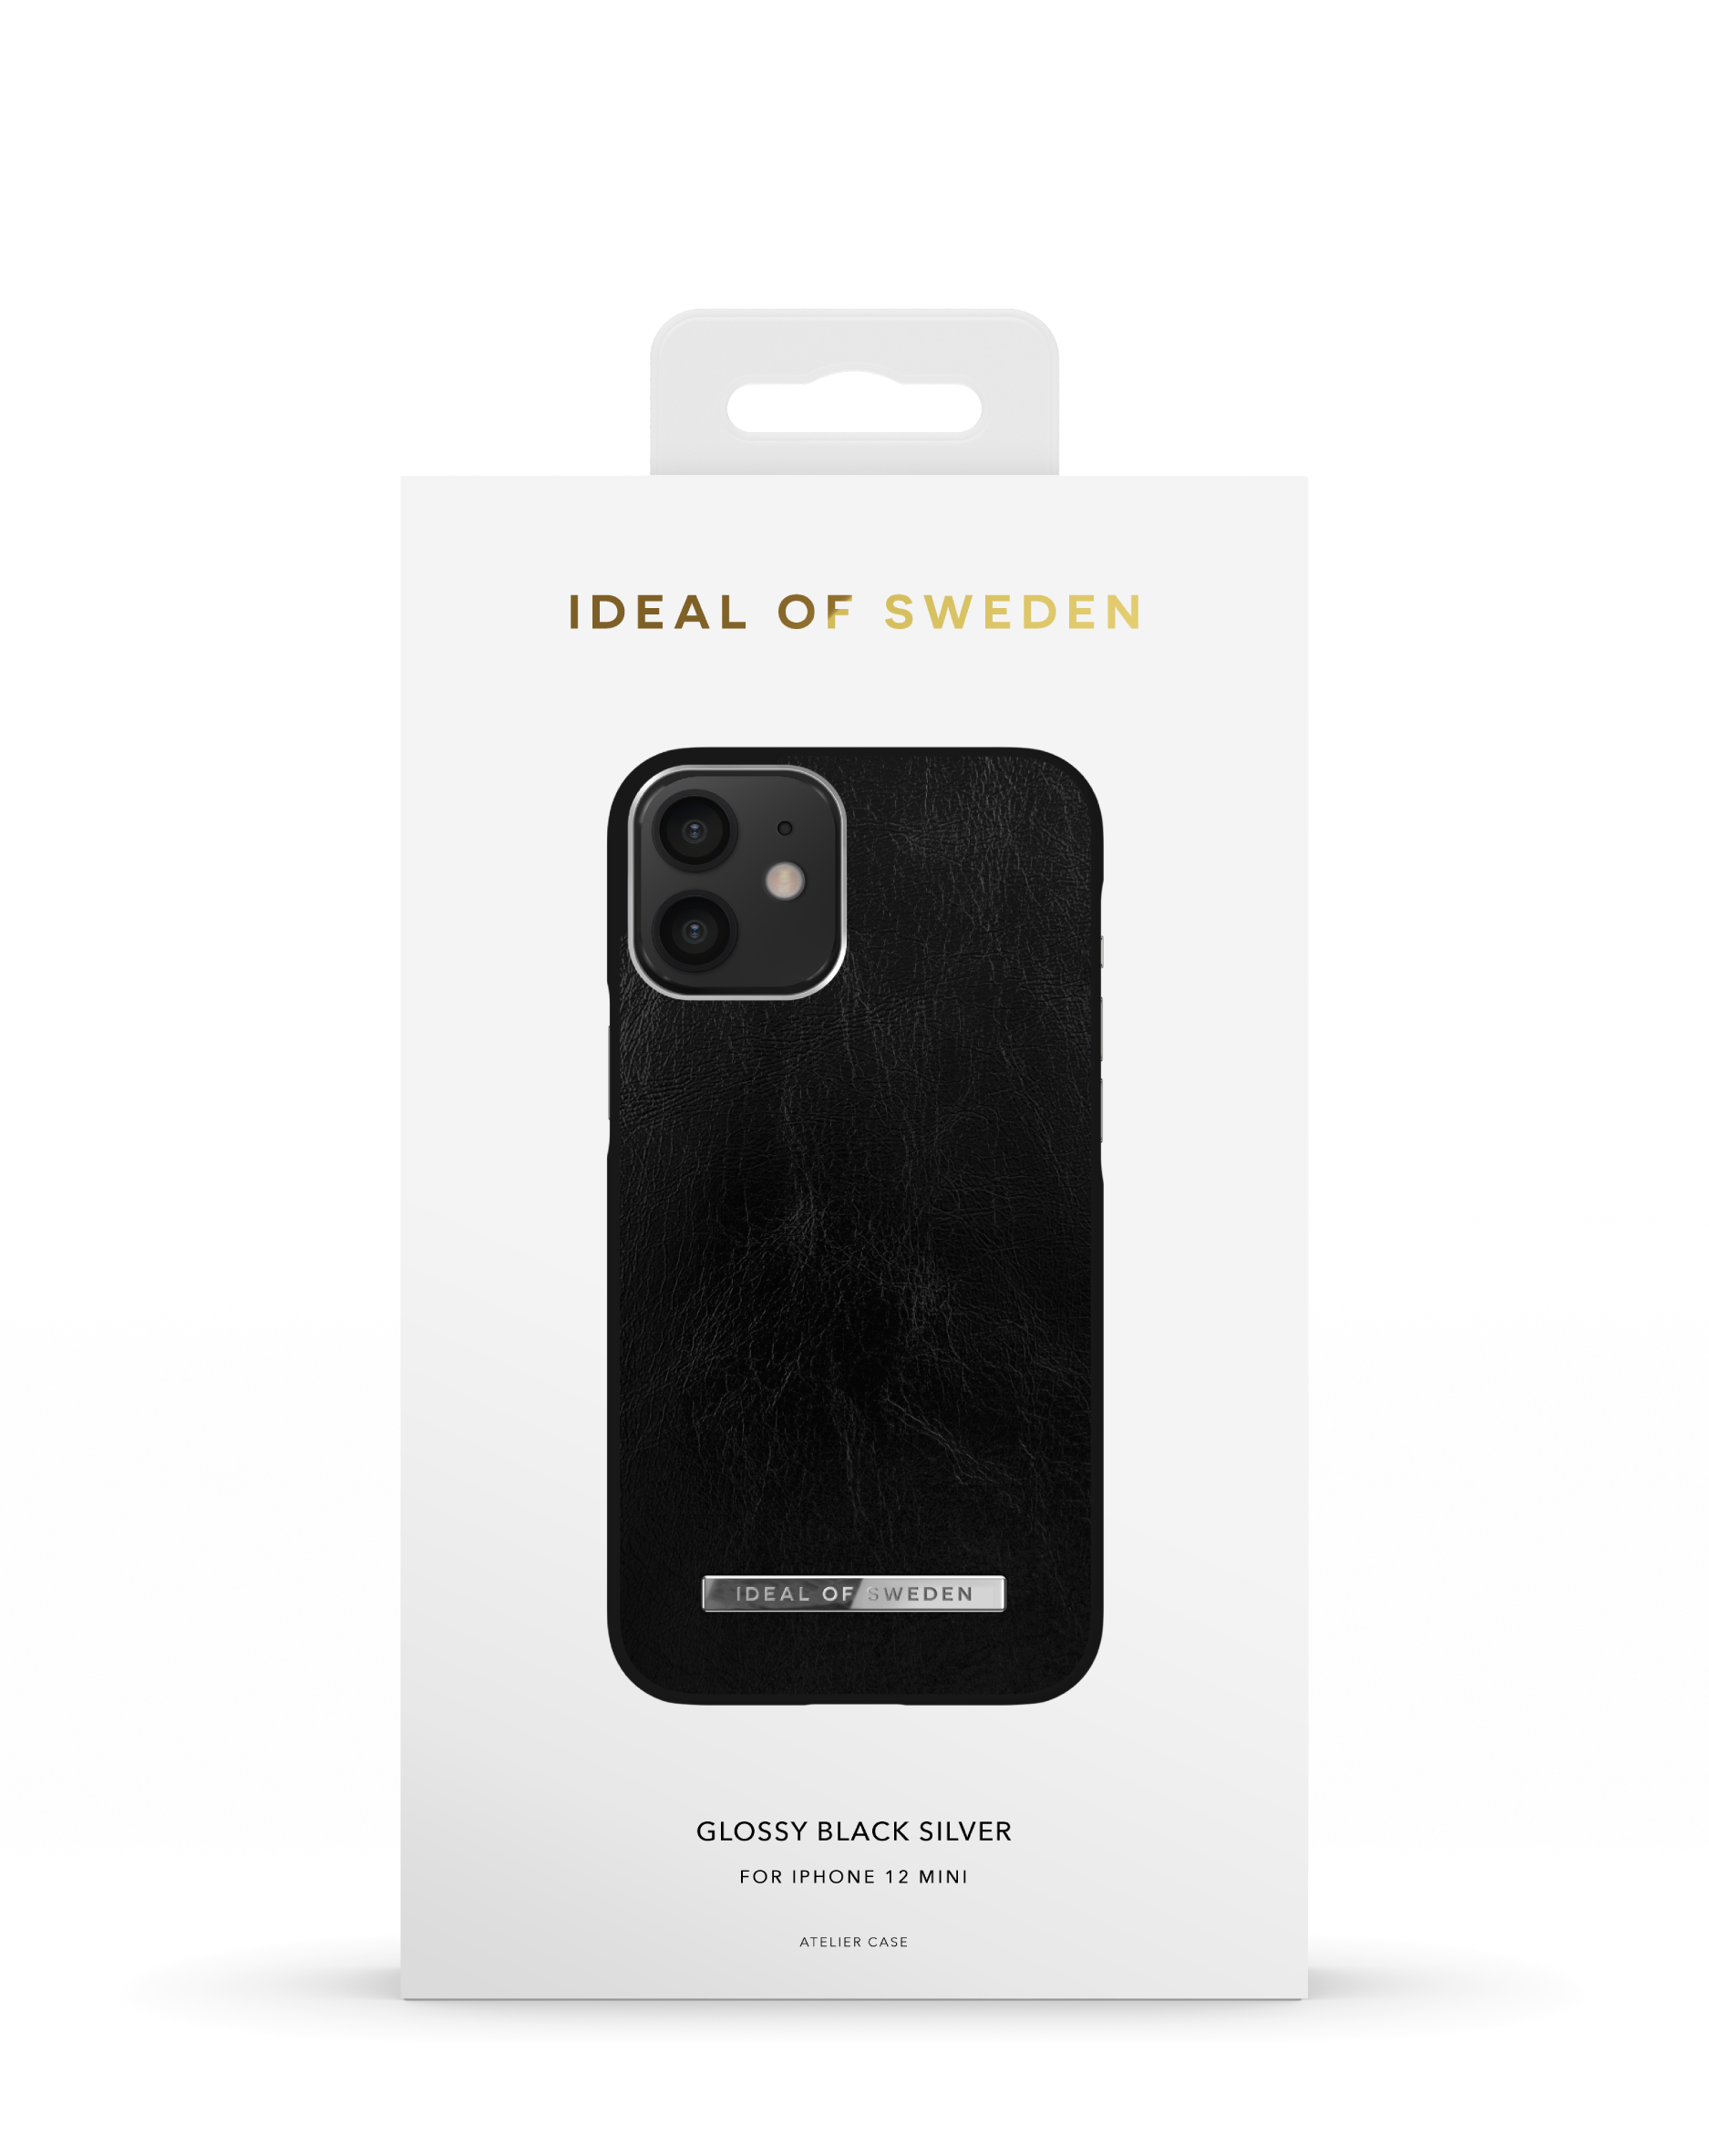 IPhone IDEAL IDACSS21-I2054-311, Apple, OF Backcover, Black mini, Silver 12 Glossy SWEDEN